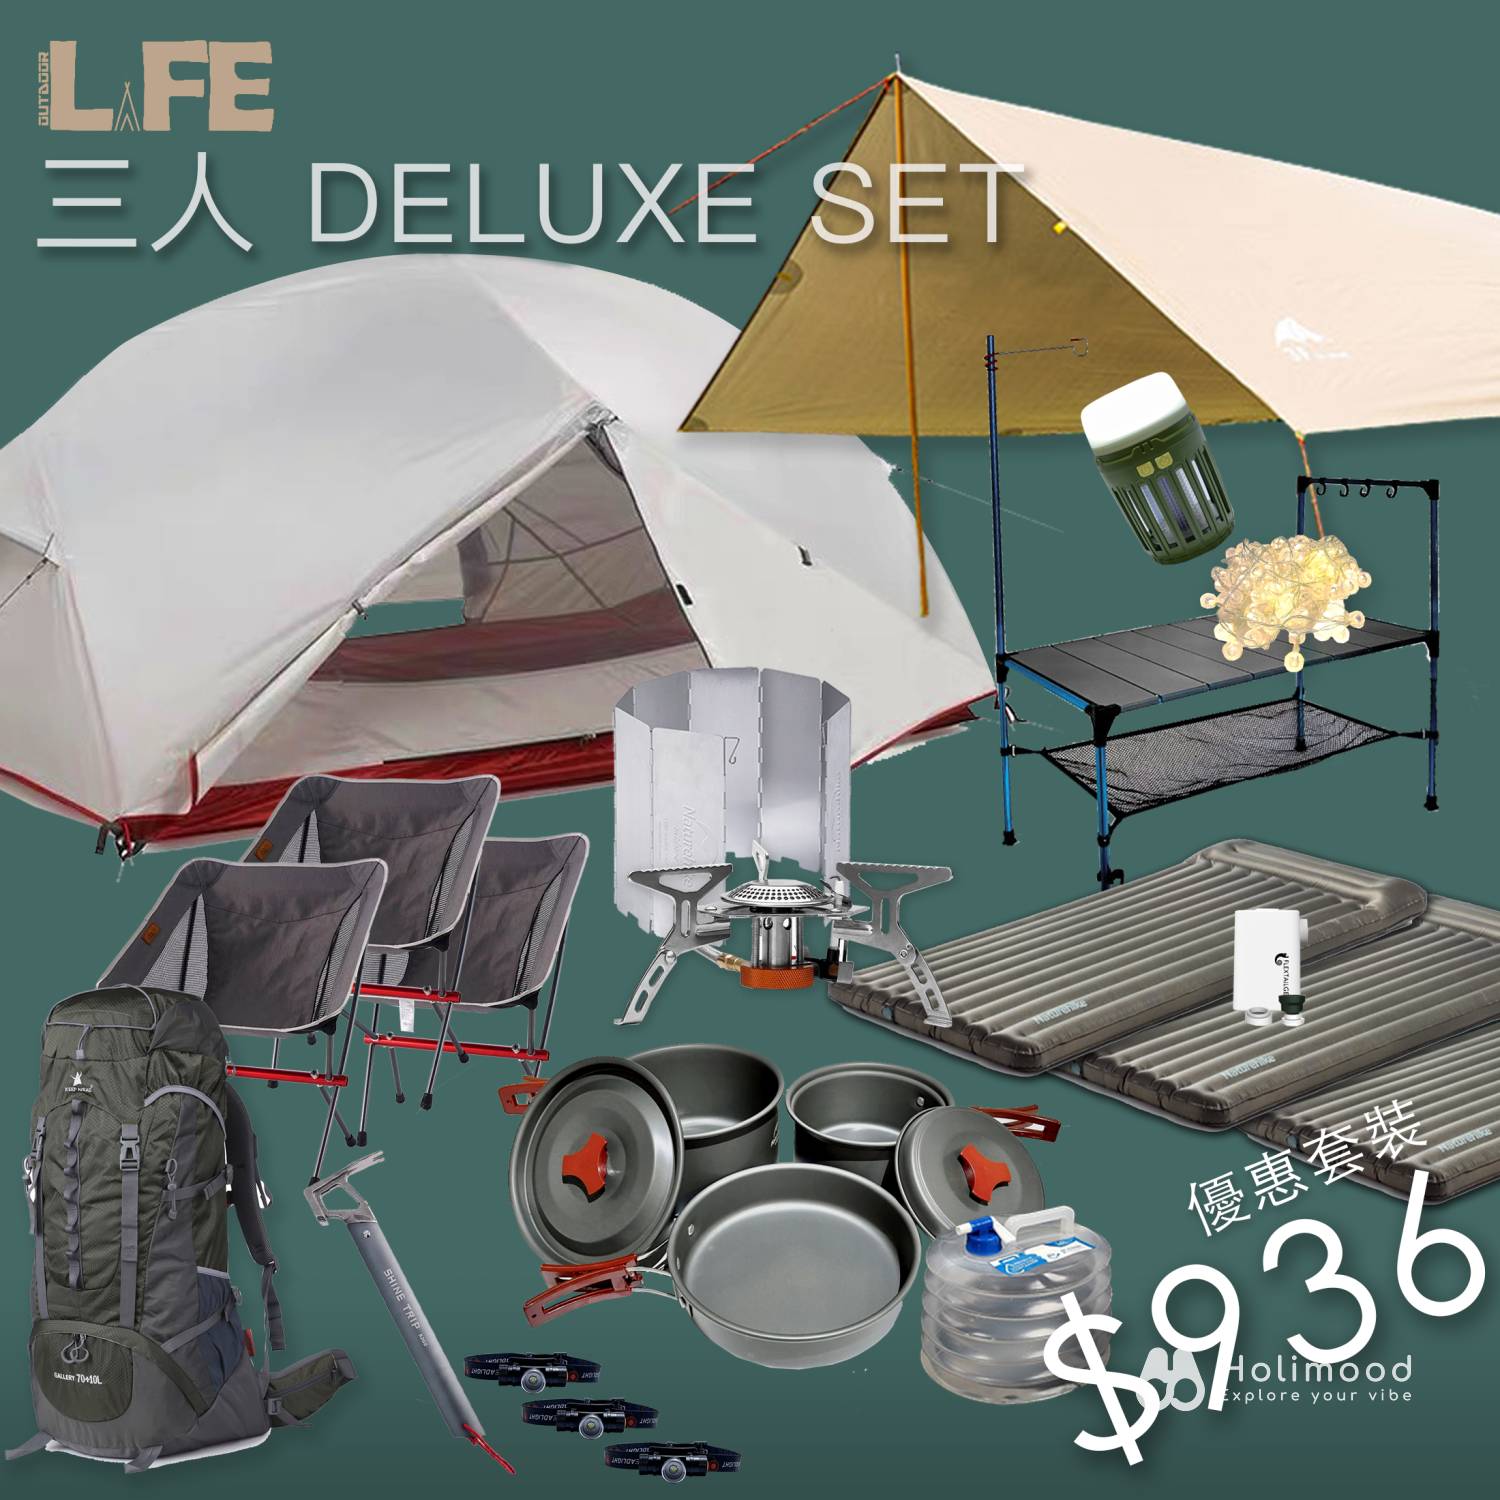 Life Outdoor *Kwai Fong / Central Pickup* - 3 Persons Camping Equipment Rental Set 4